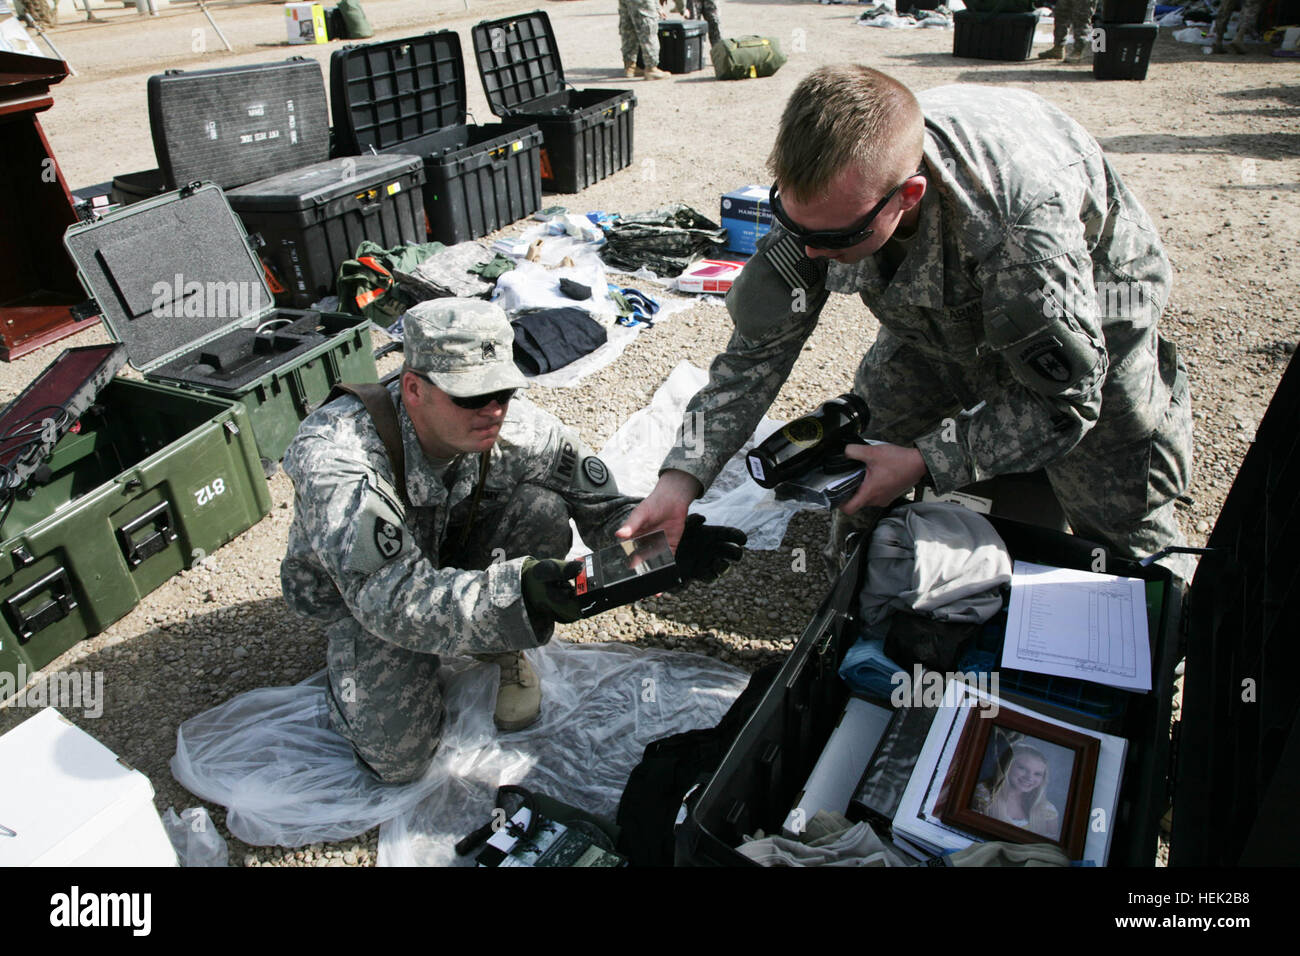 Sgt. Ronnie Head (left), a member of the Alabama National Guard, 217th Military Police Company, 336th MP Battalion, 49th MP Brigade, physically inspects the personal property of Spc. Jarrod Smith, a wheeled vehicle mechanic with the 1st Medical Brigade Headquarter's Company, prior to sealing it into a 25-foot shipping container. The Fort Hood, Texas-based , medical company will redeploy within the upcoming weeks, and resume its  CONUS (continental United States) mission. 49th Military Police Brigade Conduct Customs Operations in Iraq 272429 Stock Photo